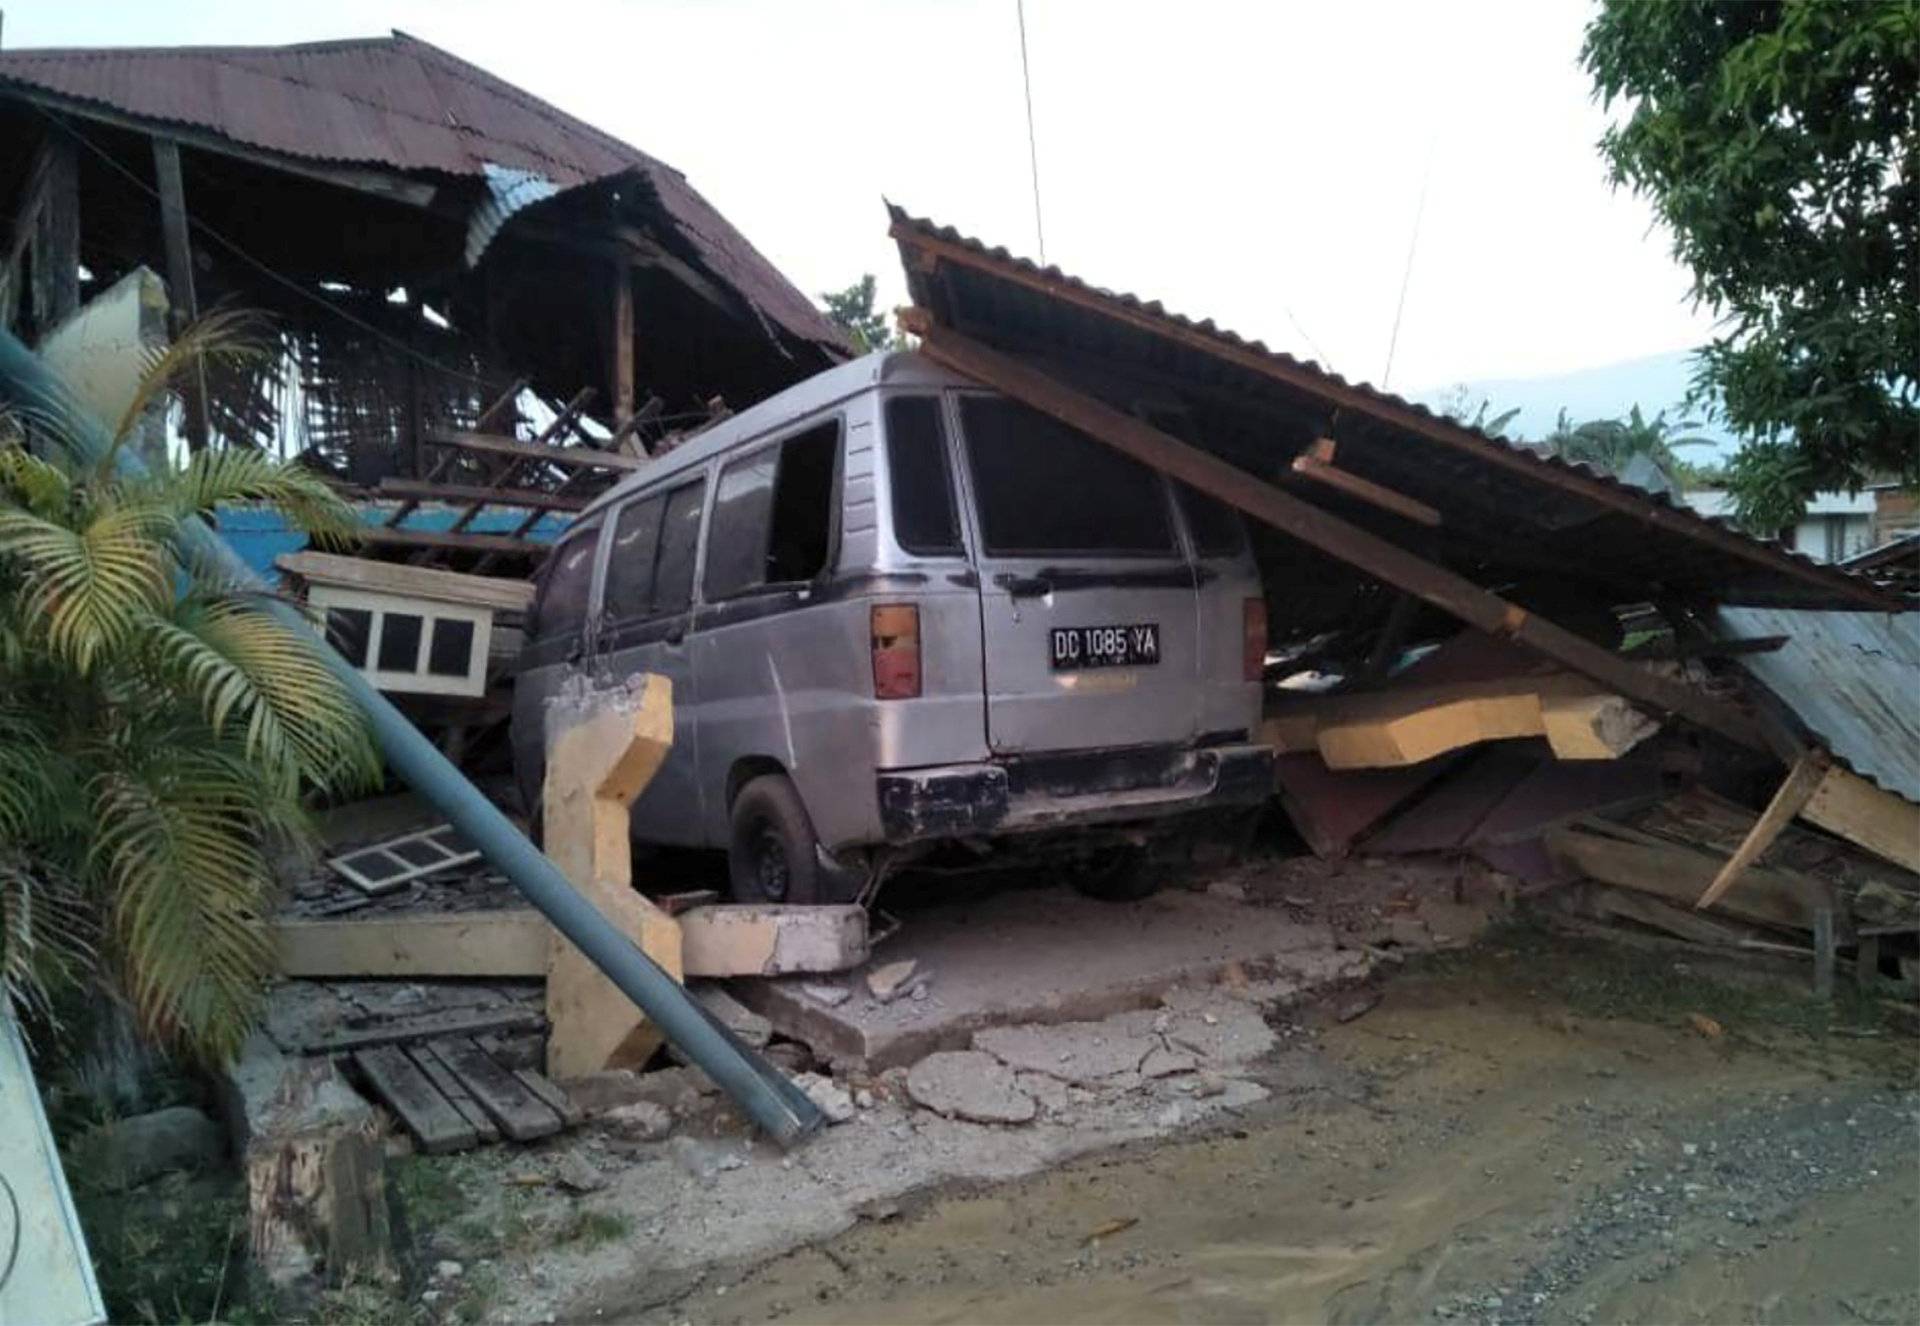 A damaged house is seen after an earthquake hit in Palu